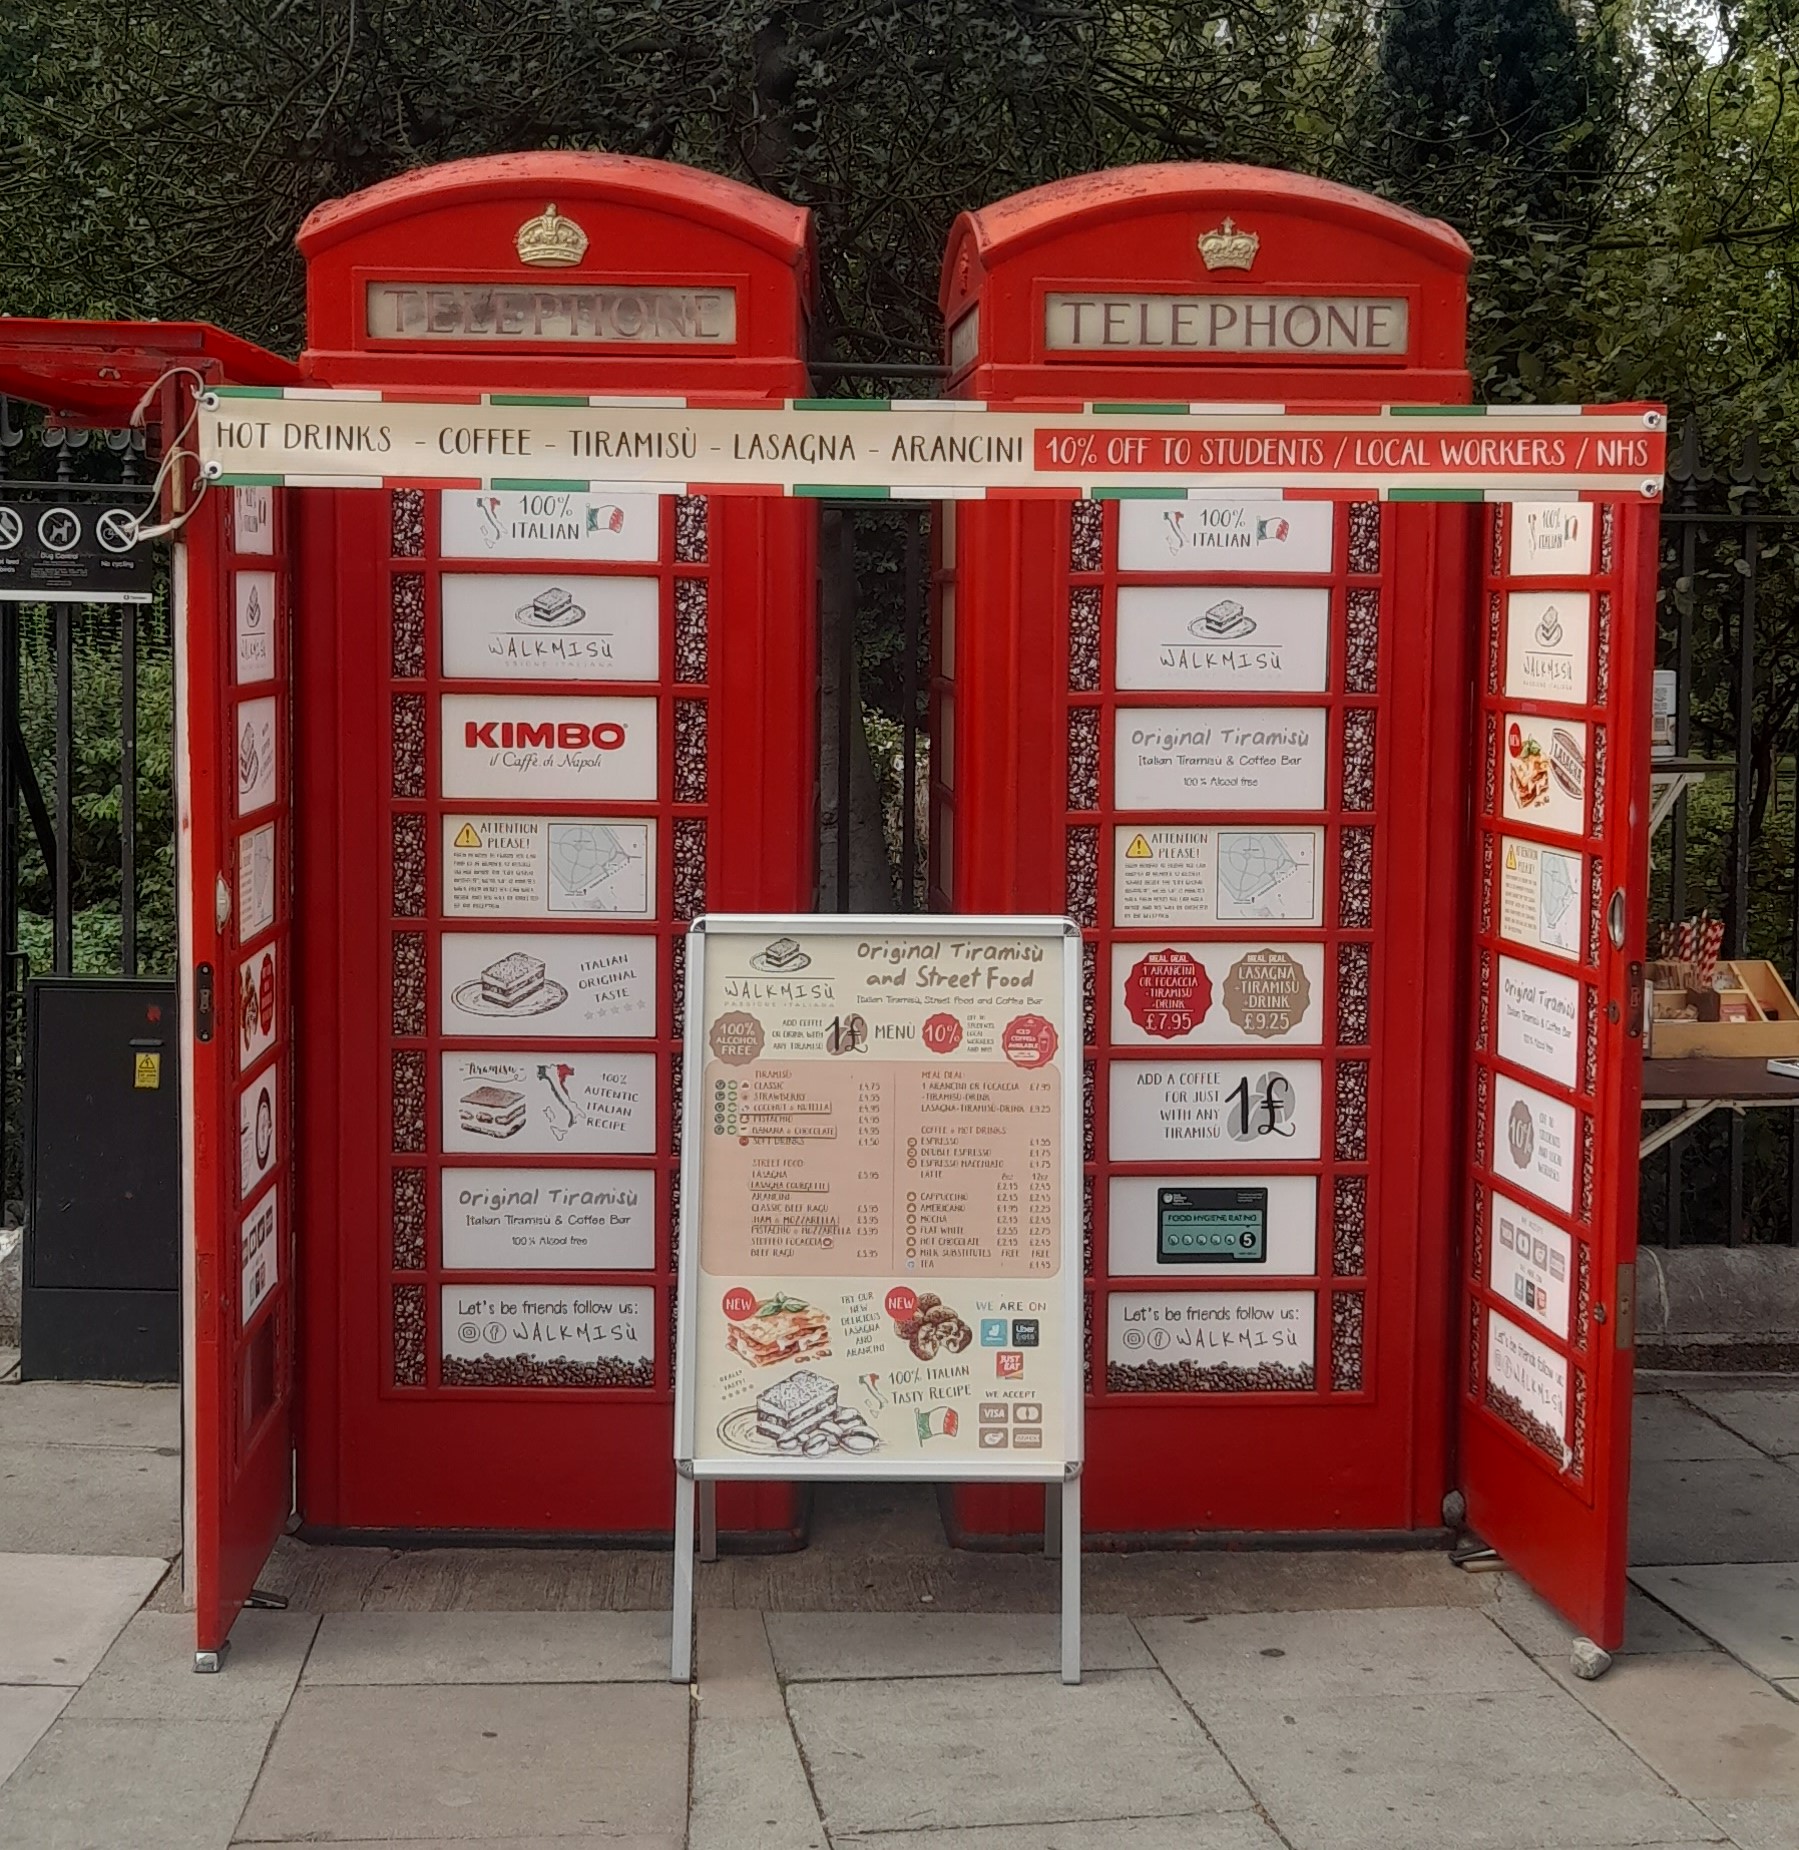 Red telephone box converted into a stall